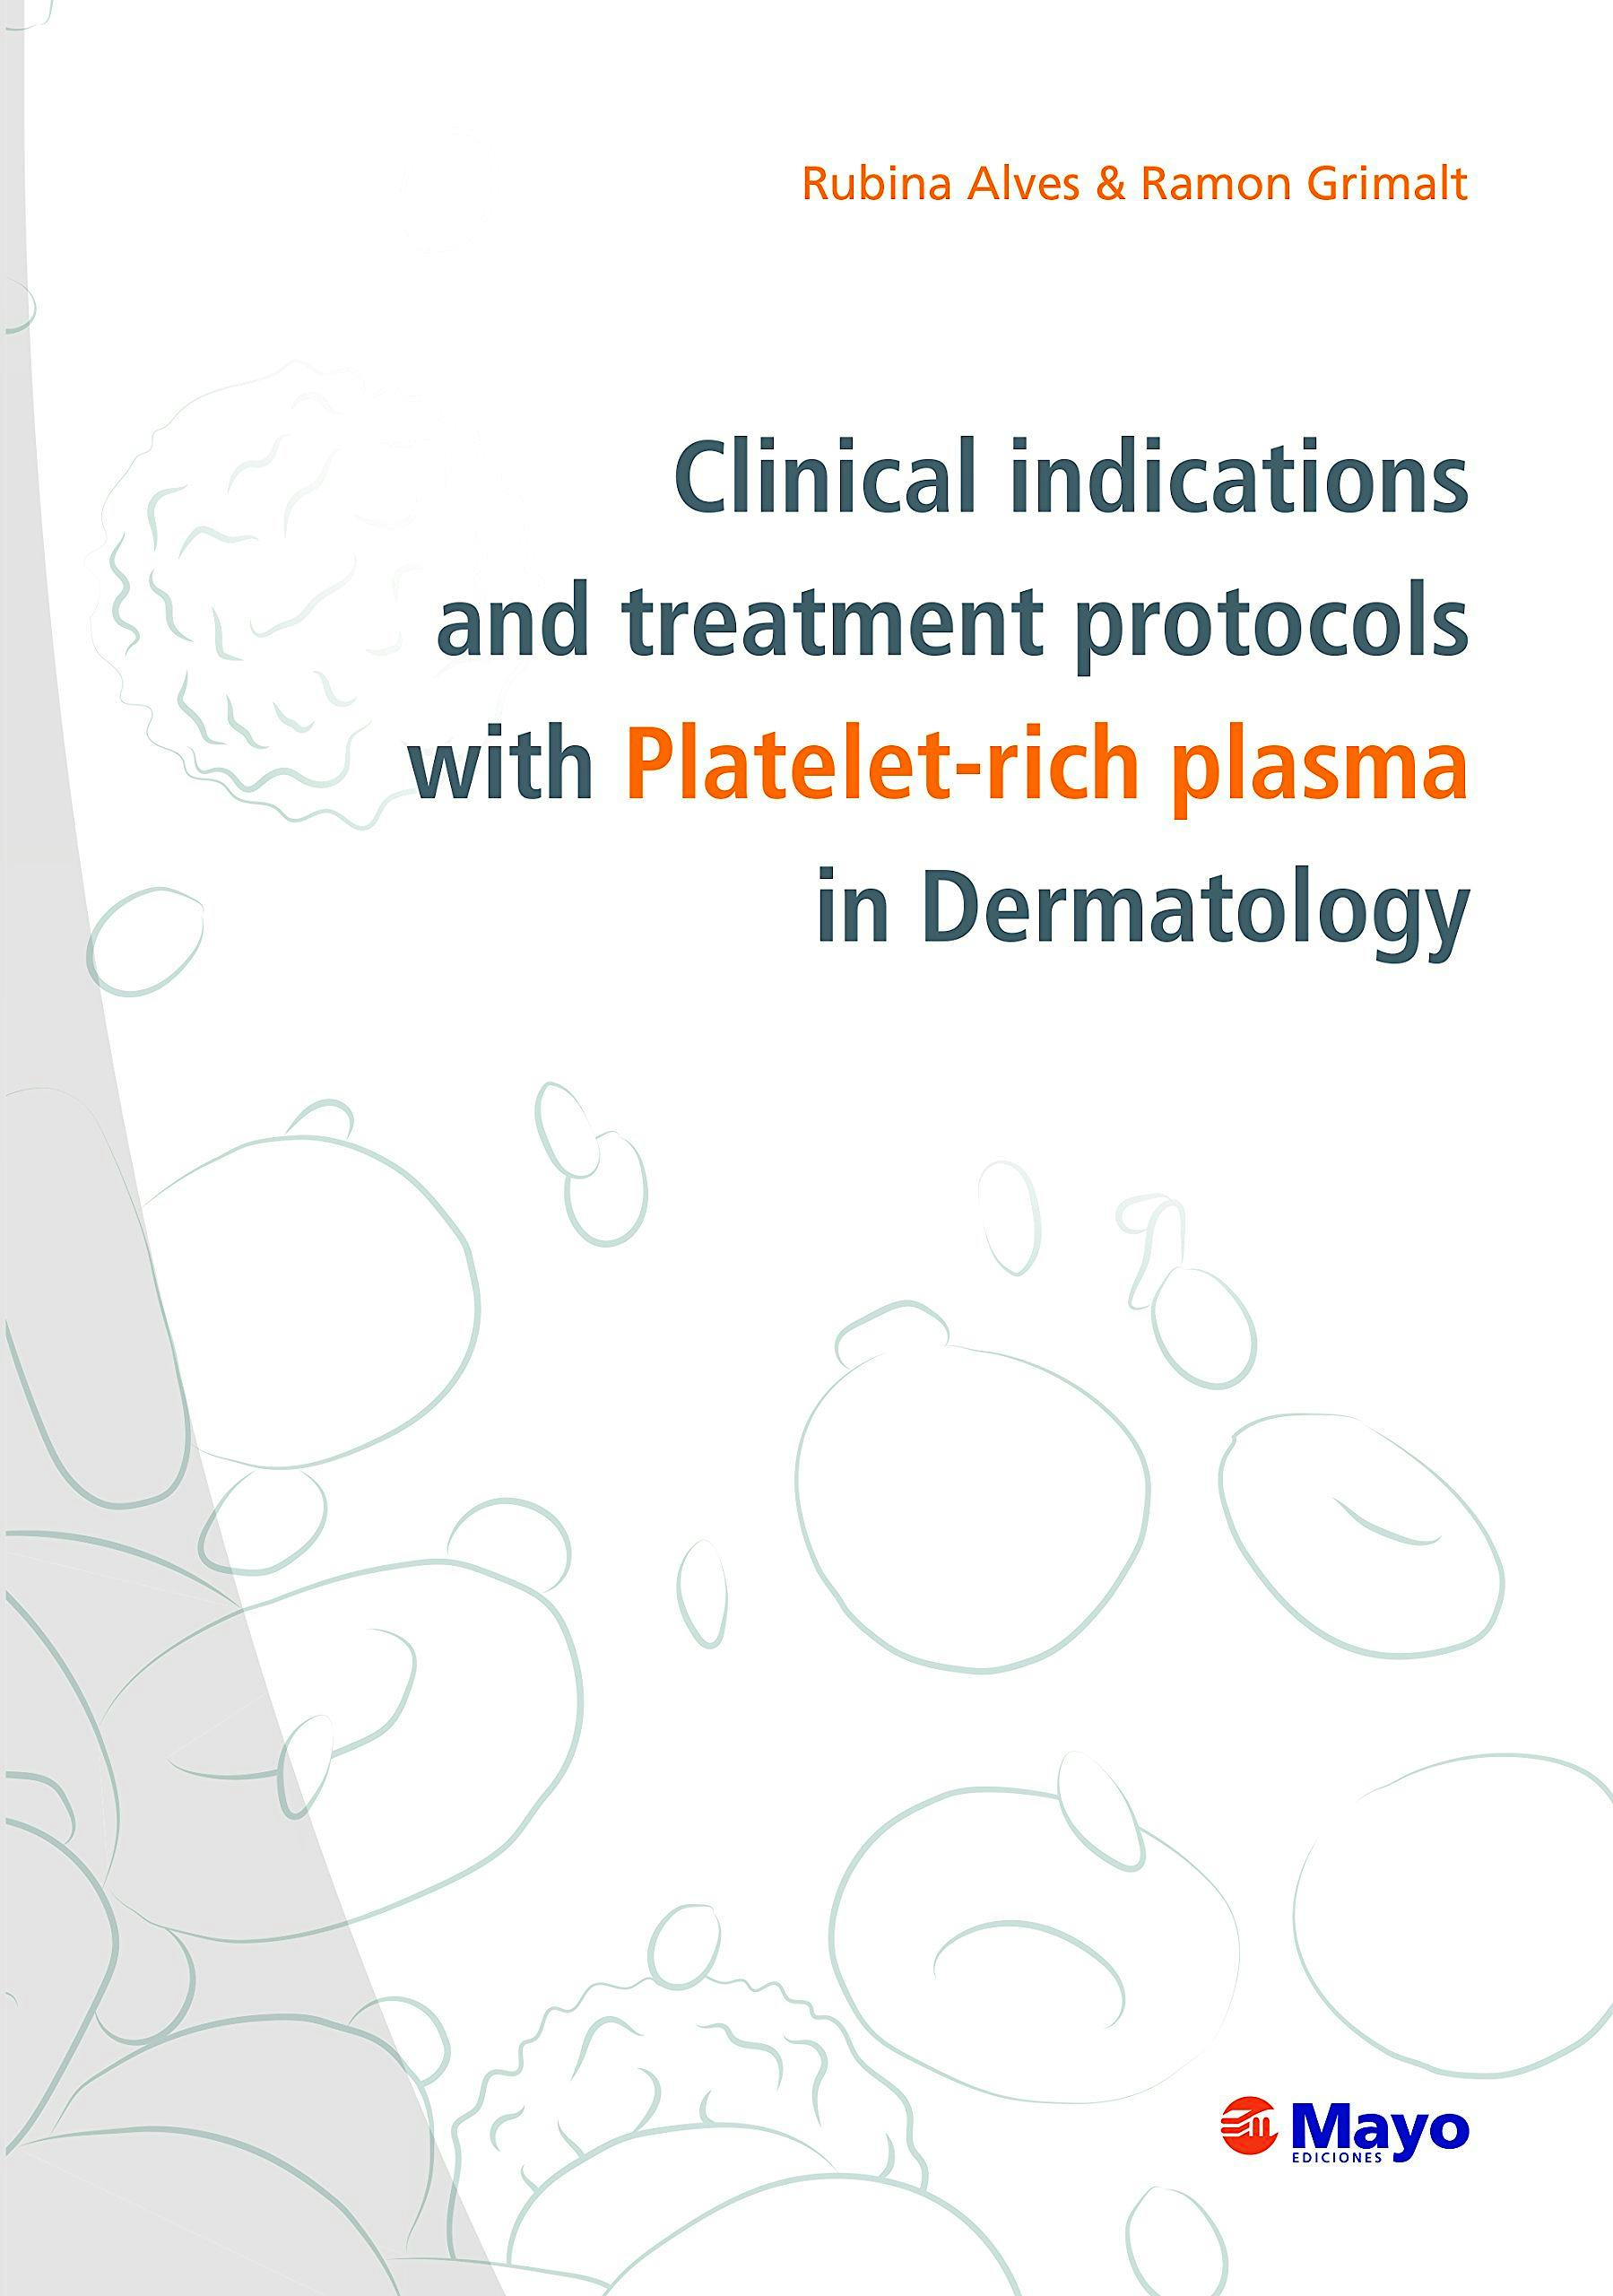 Portada del libro 9788499052120 Clinical Indications and Treatments Protocols with Platelet-Rich Plasma in Dermatology